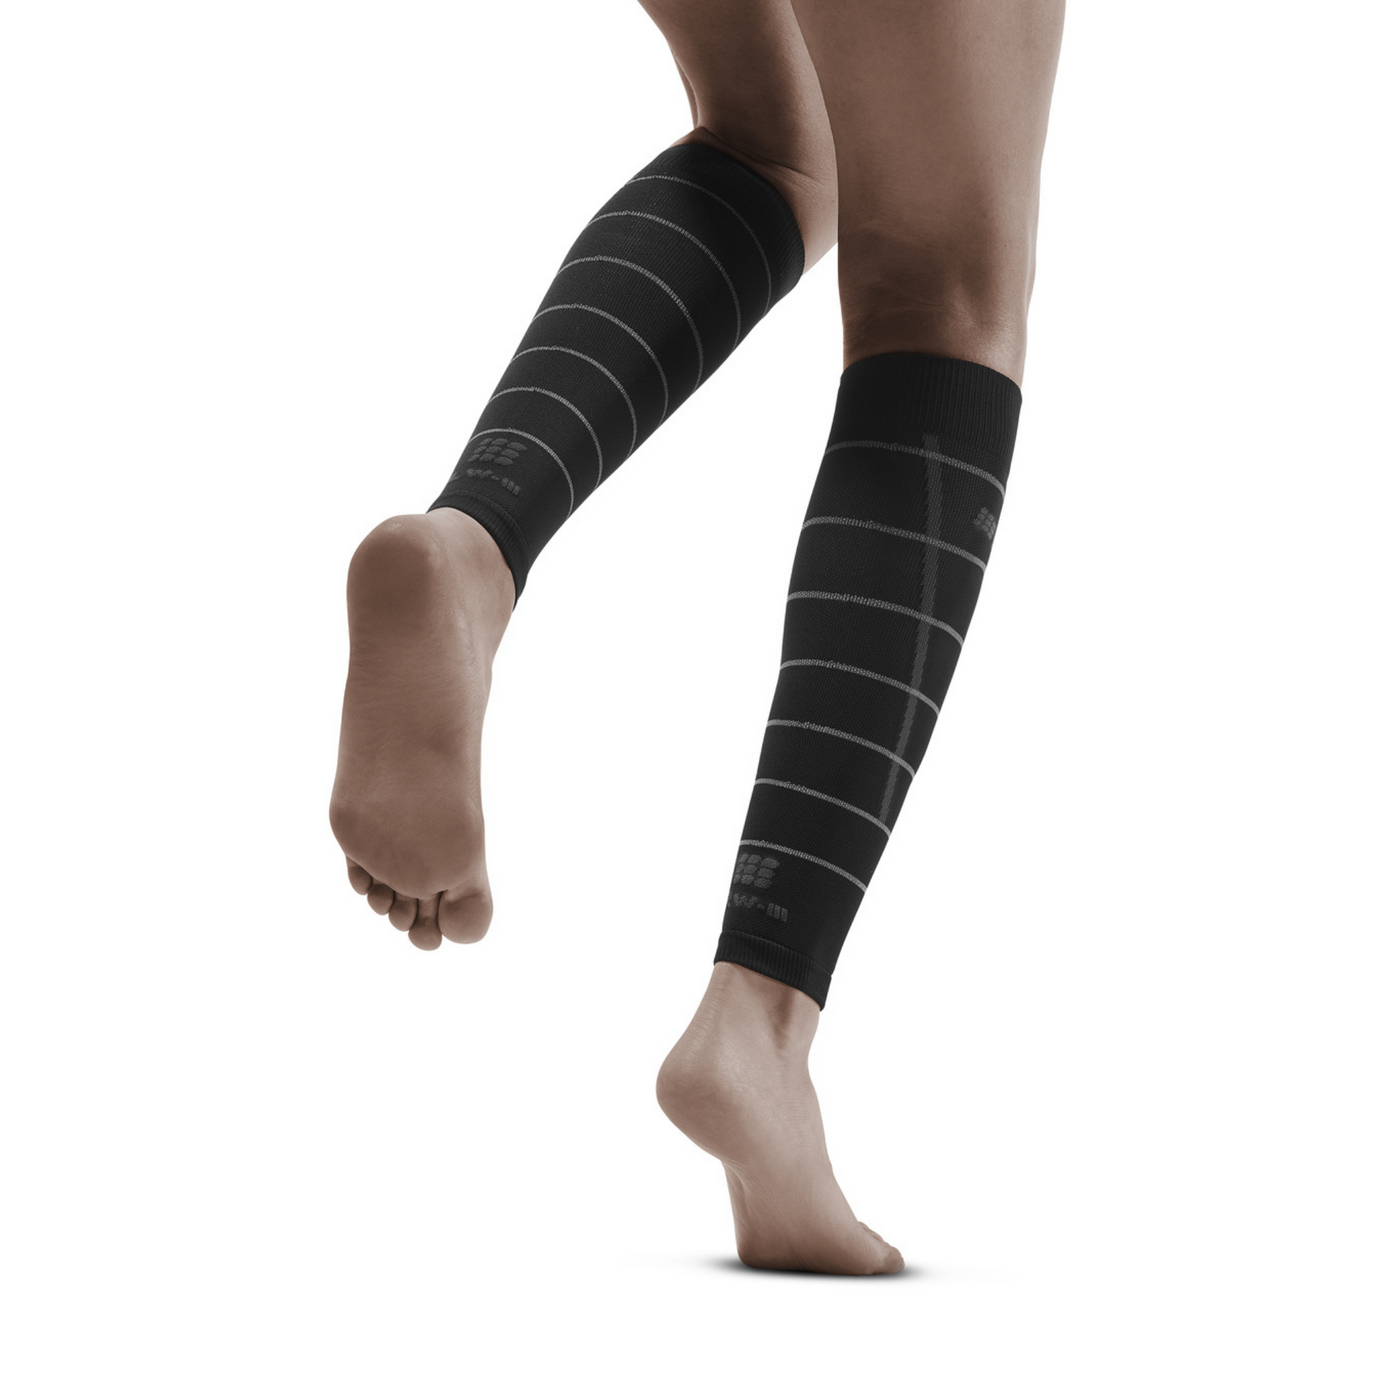 Reflective Compression Calf Sleeves, Women, Black/Silver, Back View Model